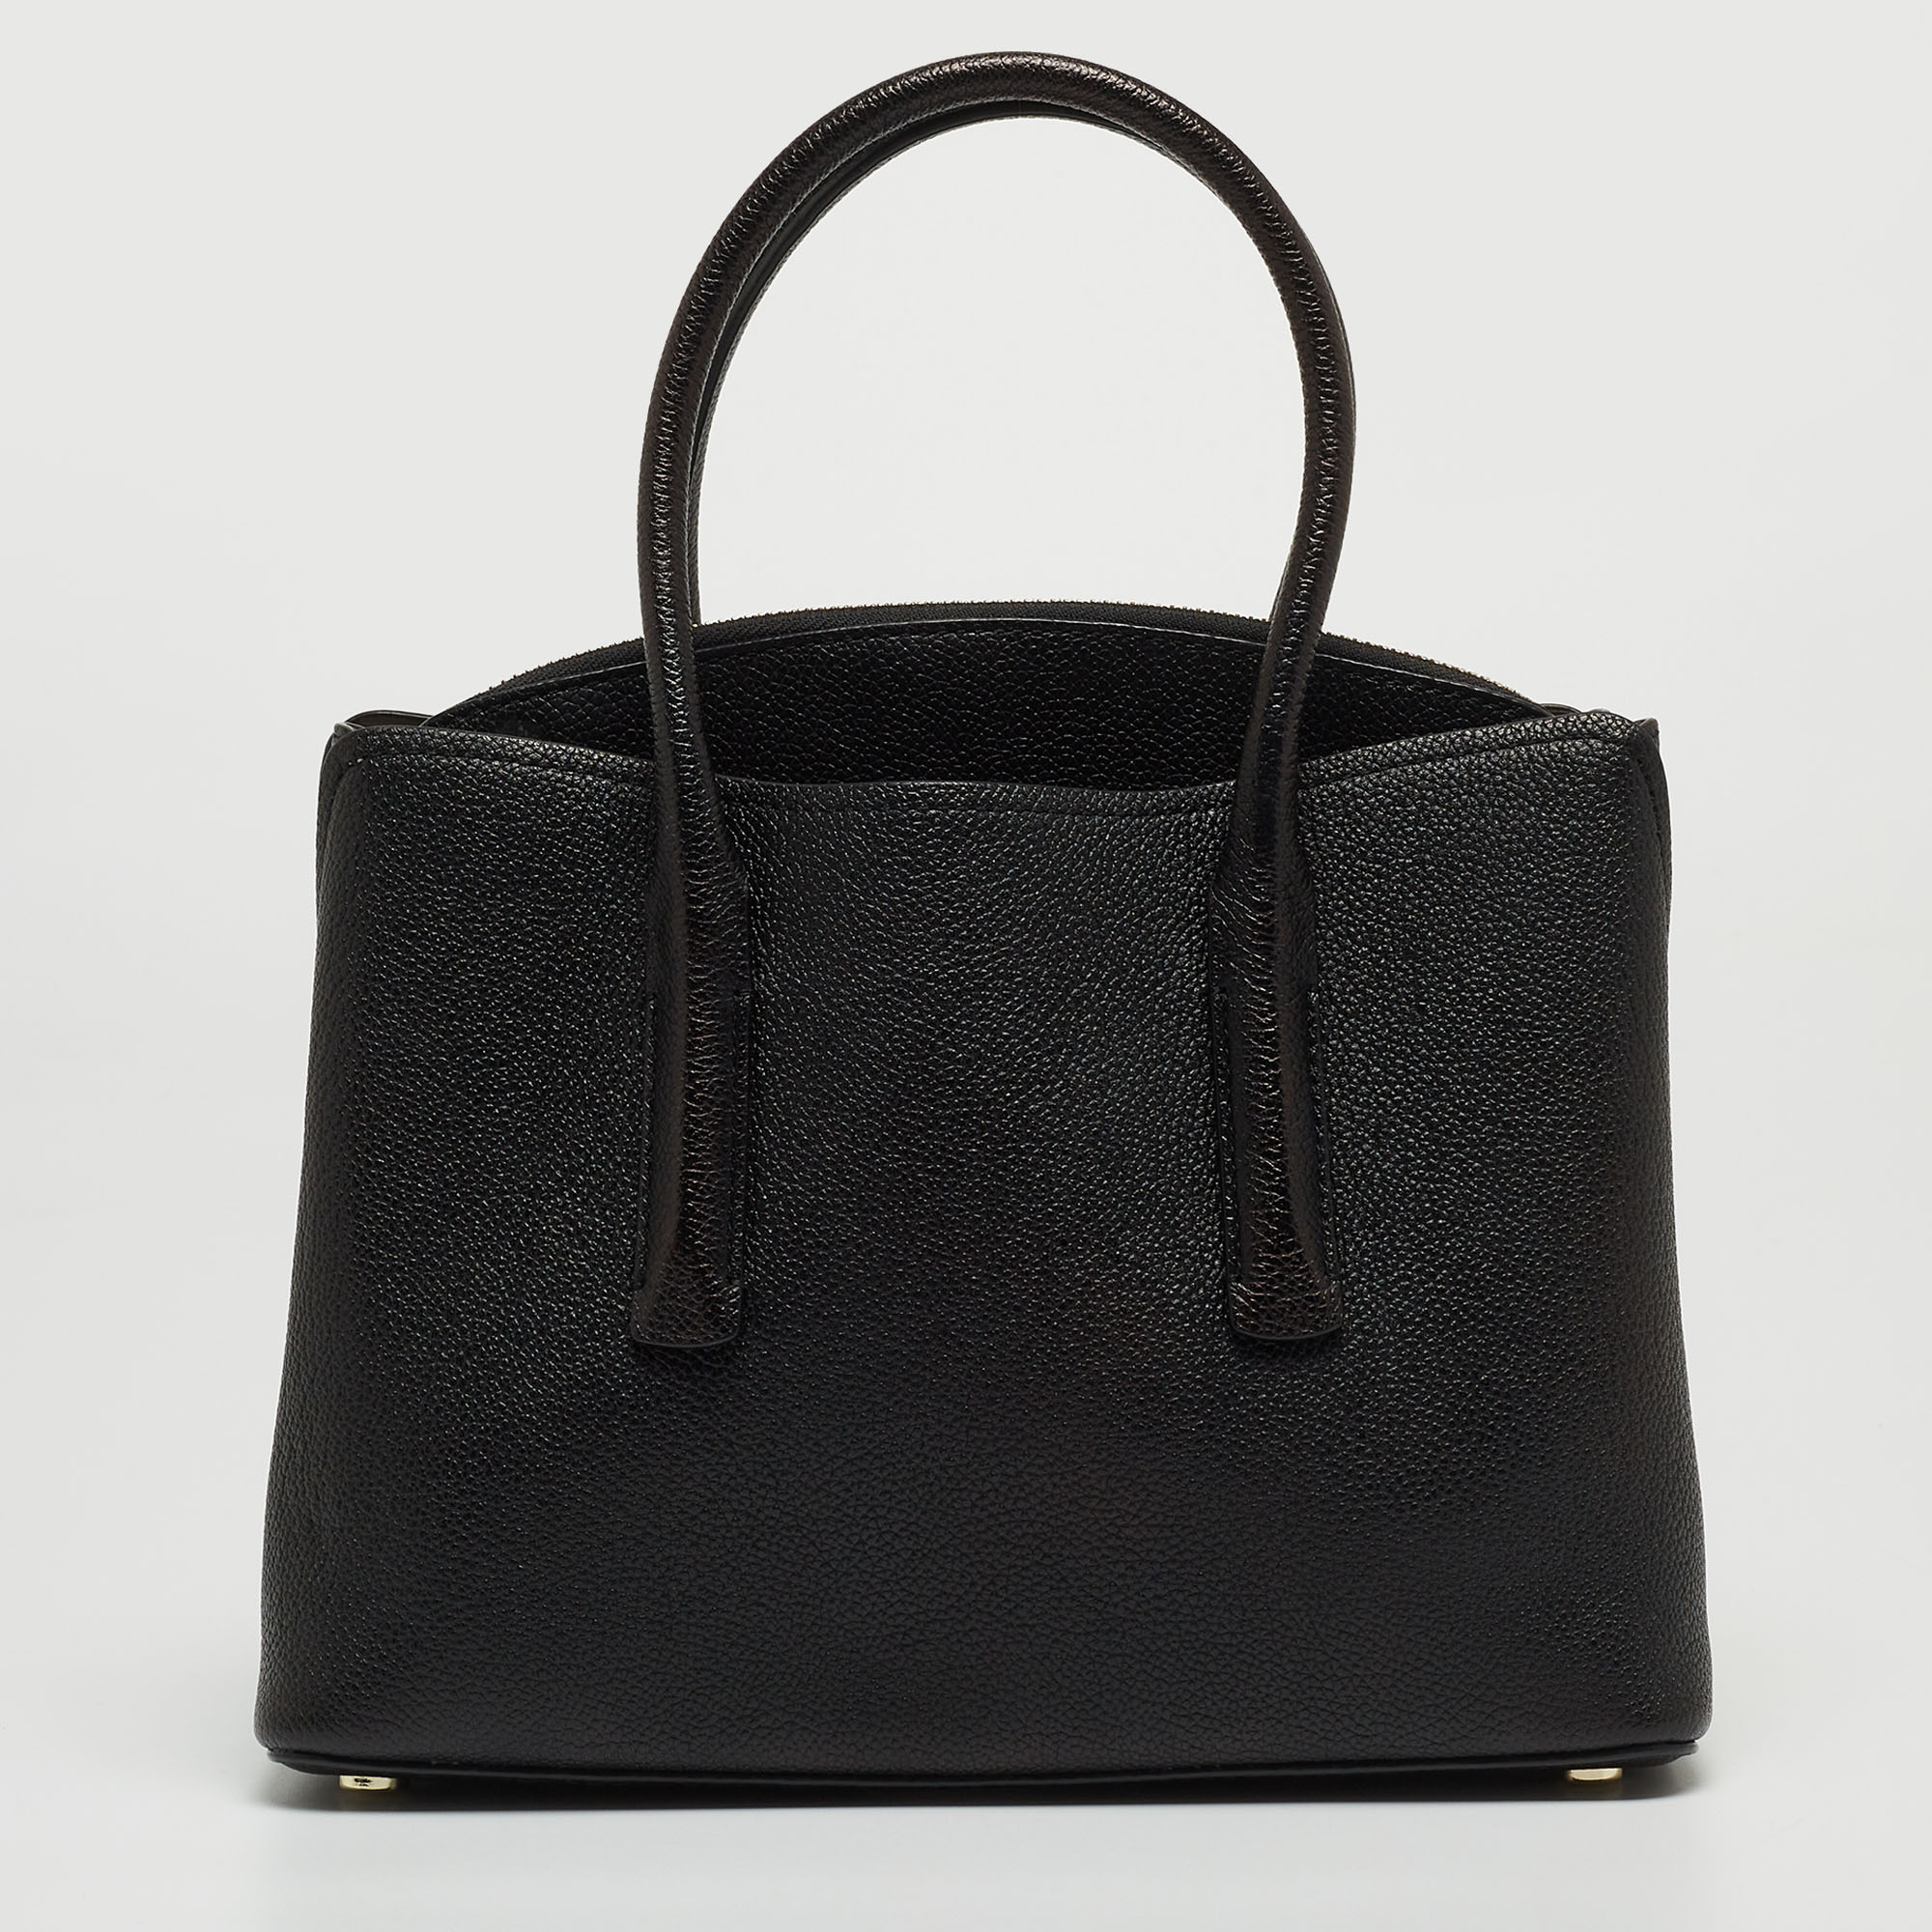 Kate Spade Black Leather Margaux Tote